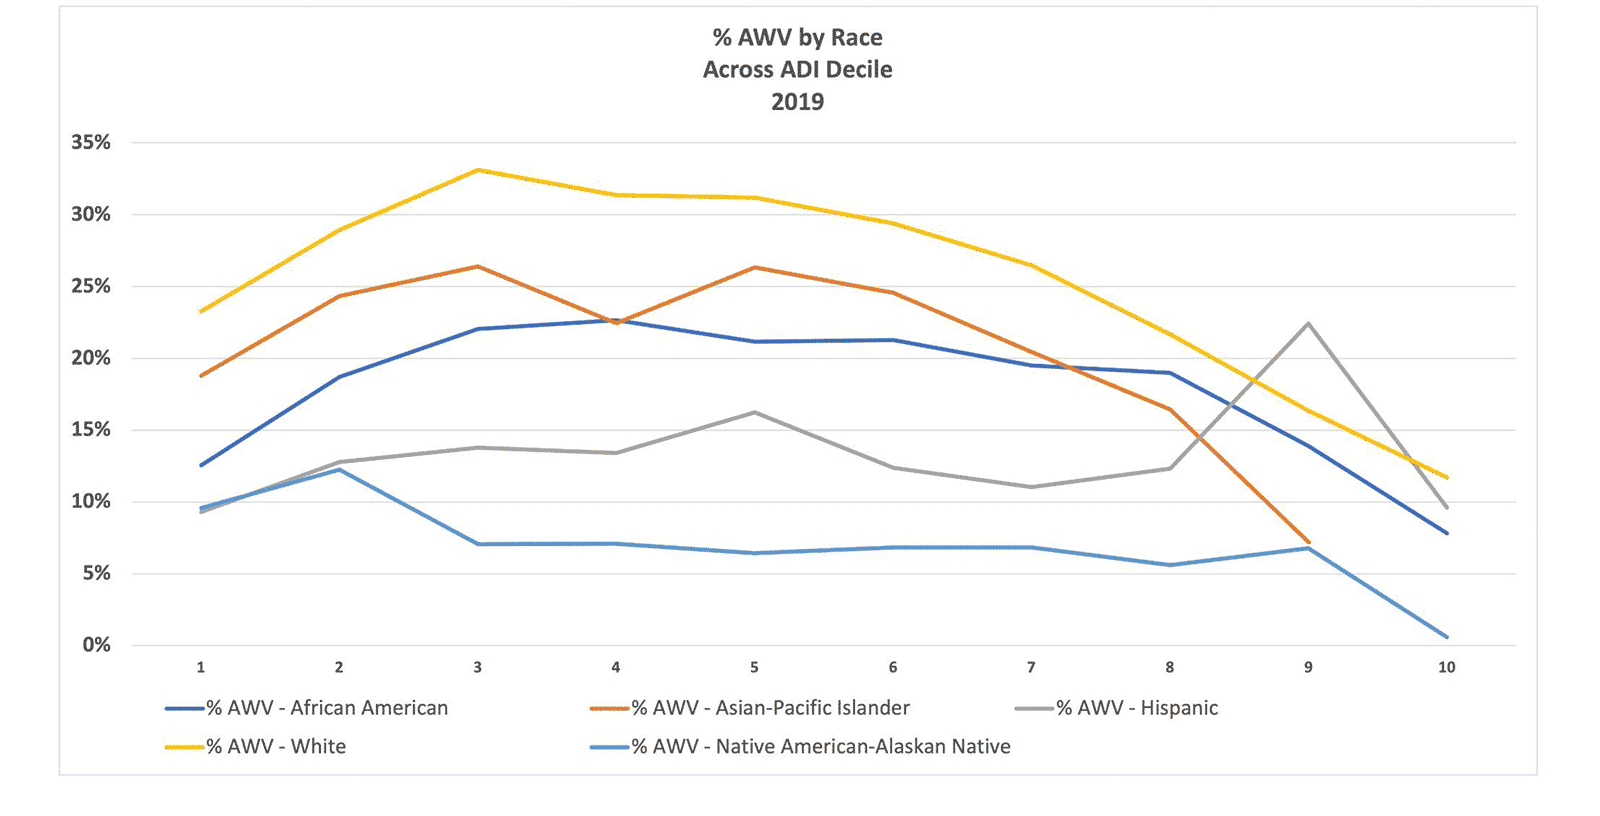 Percent AWV by Race Across ADI Decile 2019